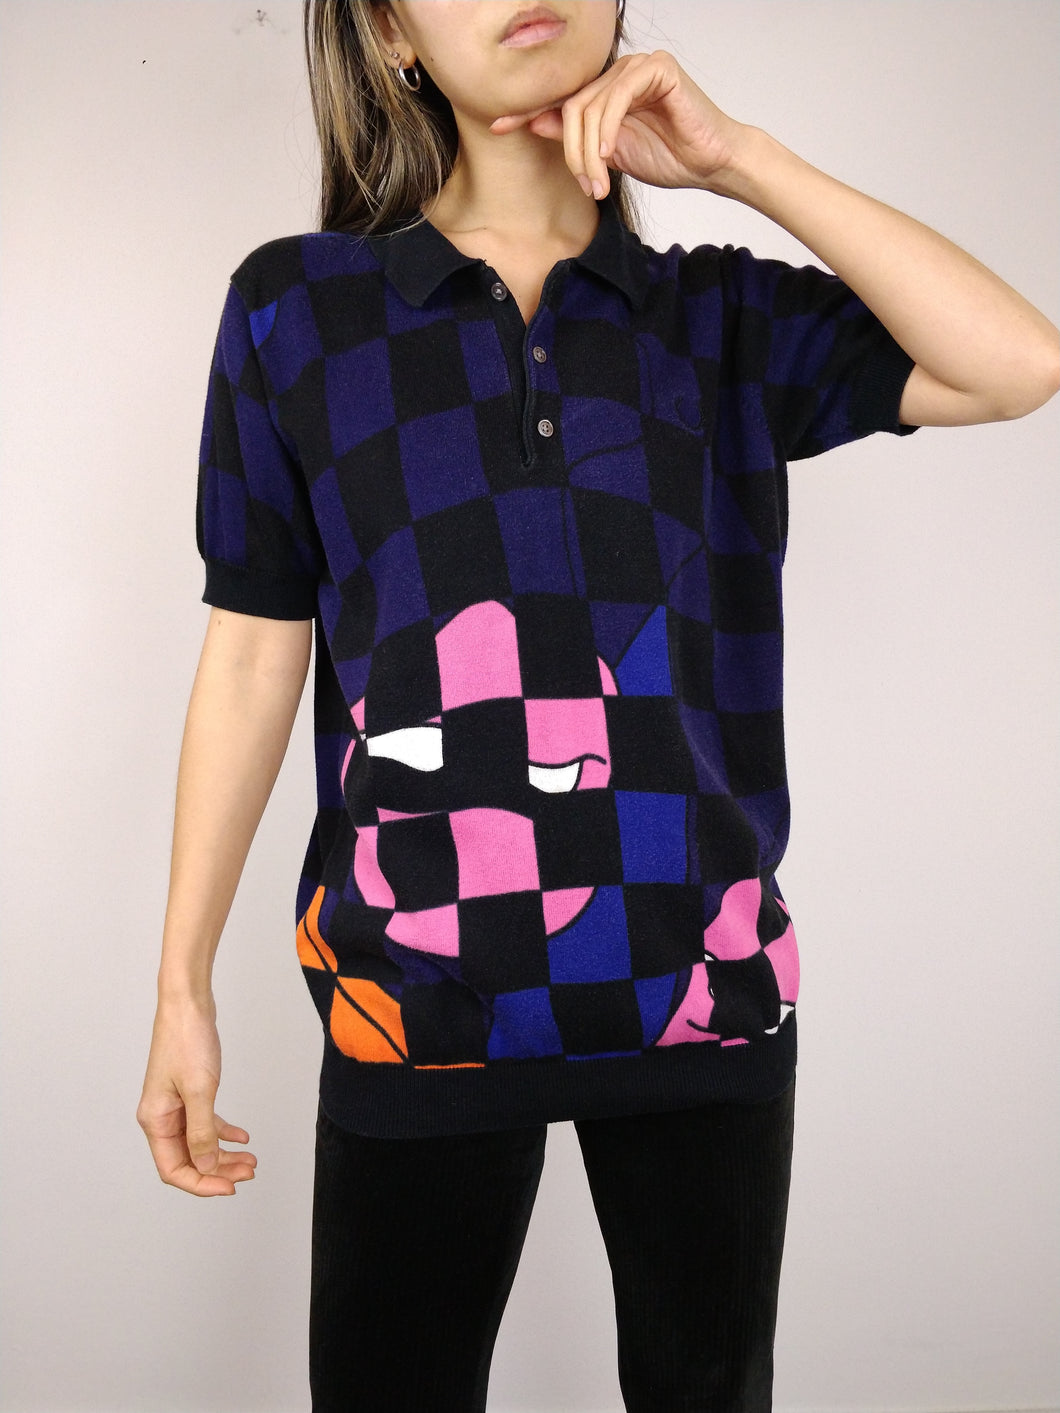 The Raf Simons x Fred Perry Polo | Vintage designer polo knit checkered black pink purple pattern lips kiss short sleeve shirt top S-M